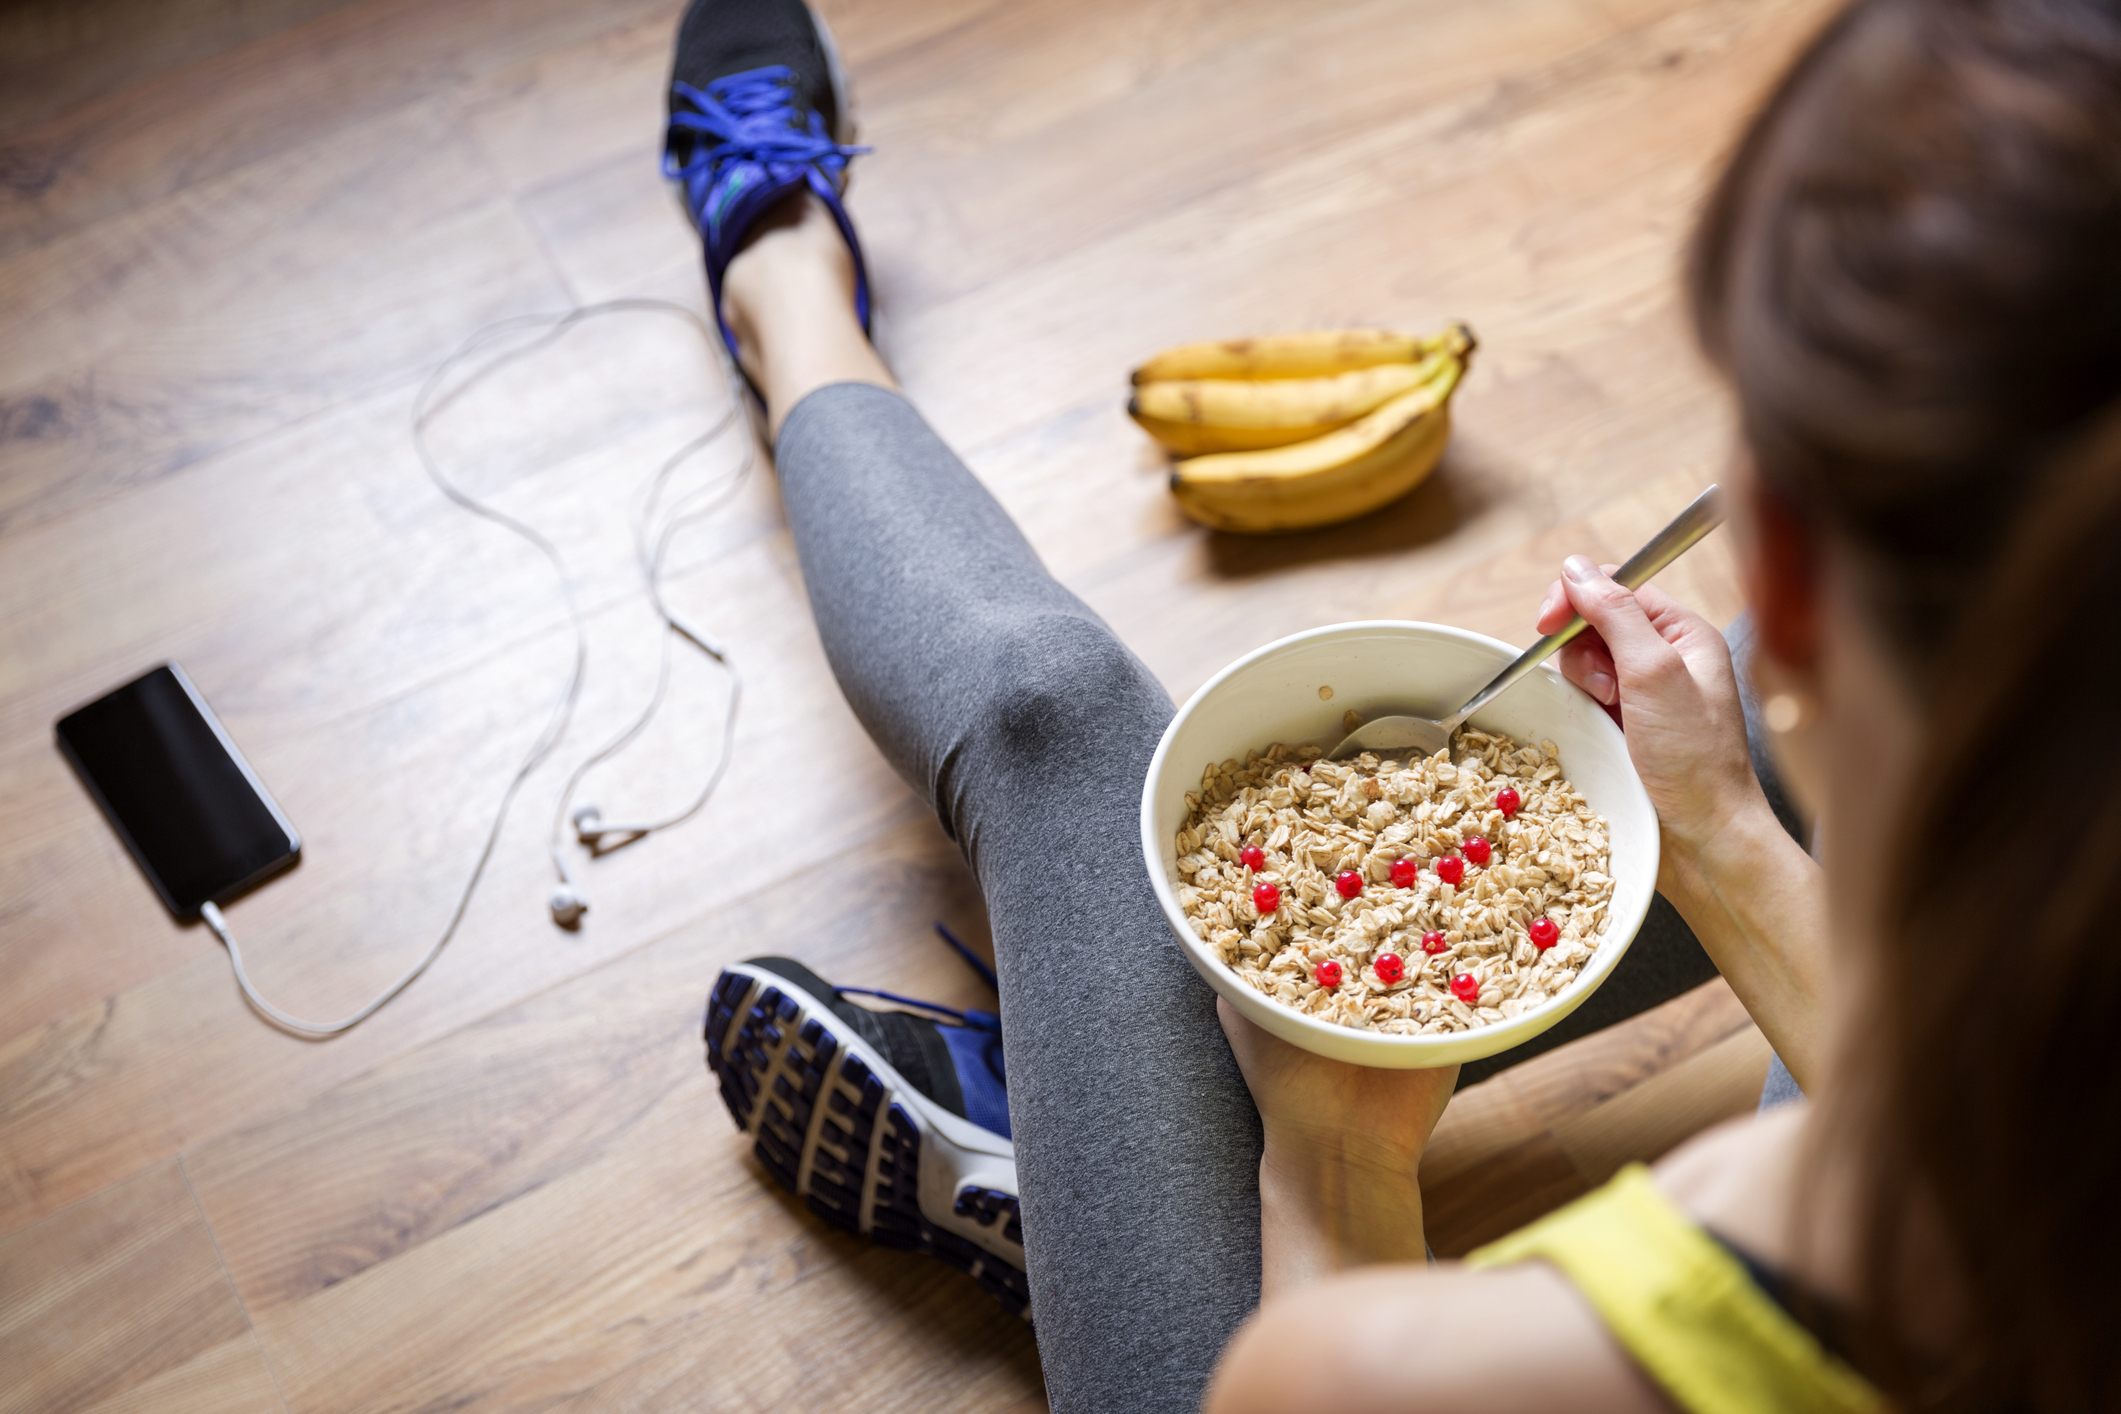 Young girl eating a oatmeal with berries after a workout. Fitness and healthy lifestyle concept.